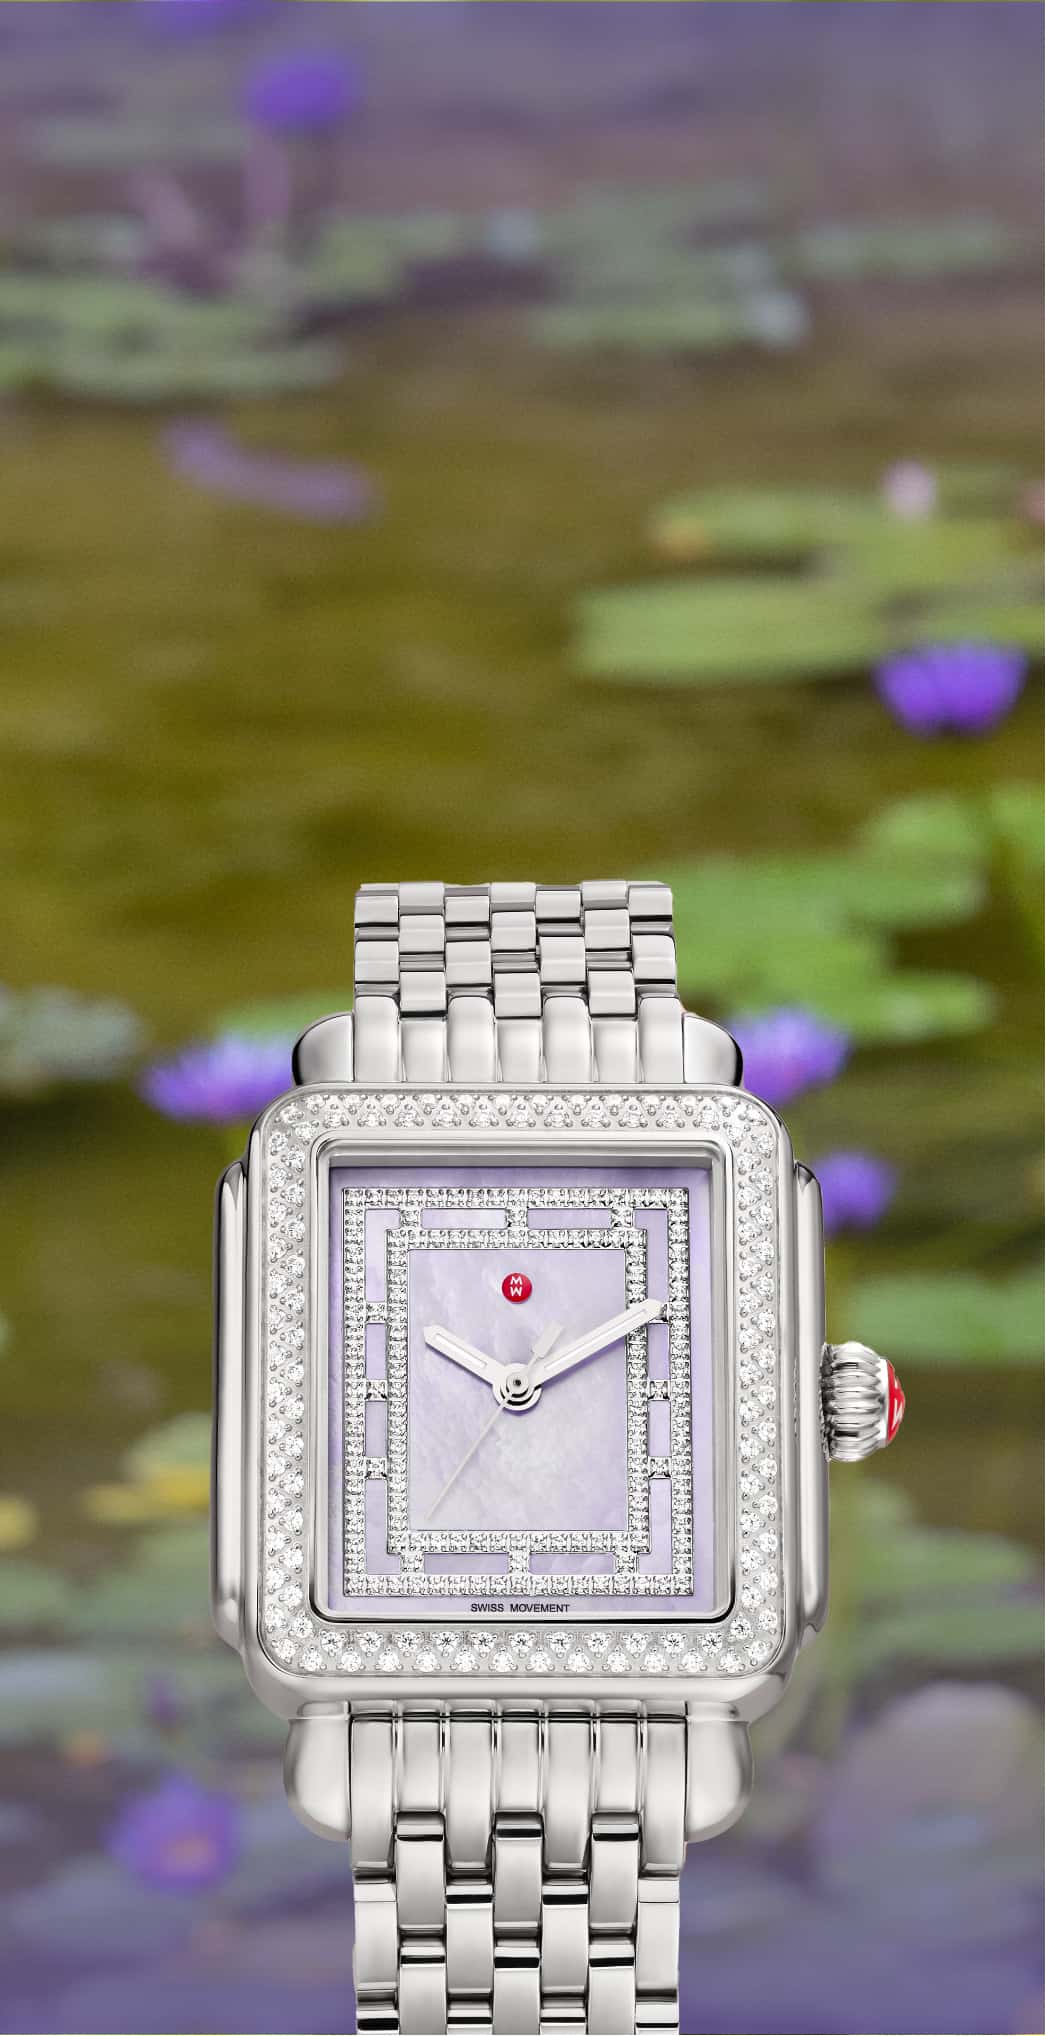 Deco Lavender watch by MICHELE featuring pavé diamonds and a lavender mother-of-pearl face